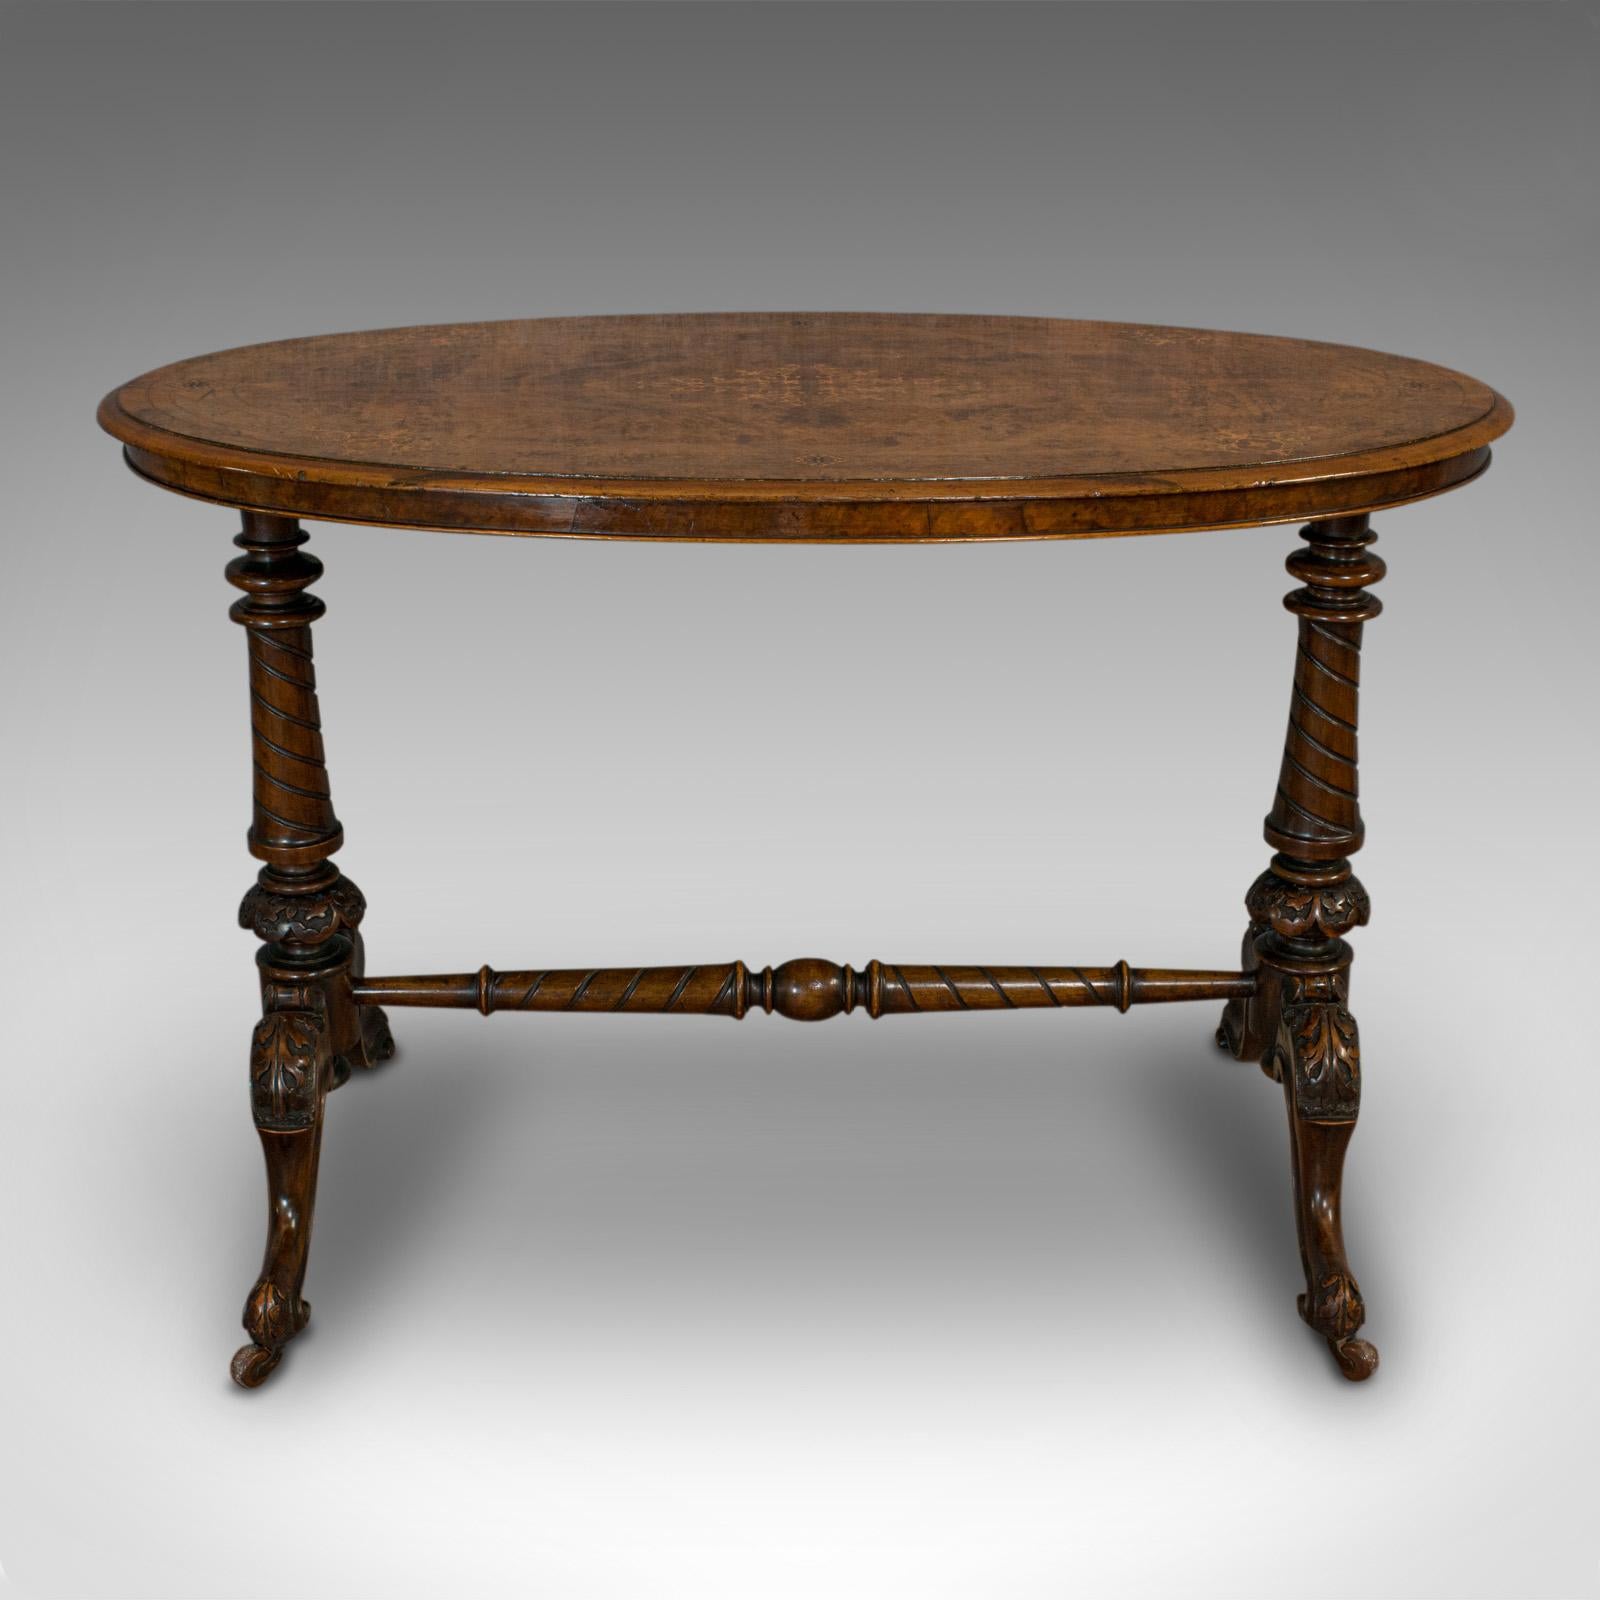 This is an antique oval table. An English, burr walnut centre or side table, dating to the Victorian period, circa 1870.

Beautiful figuring and craftsmanship
Displays a desirable aged patina
Burr walnut shows fine grain interest
Rich caramel